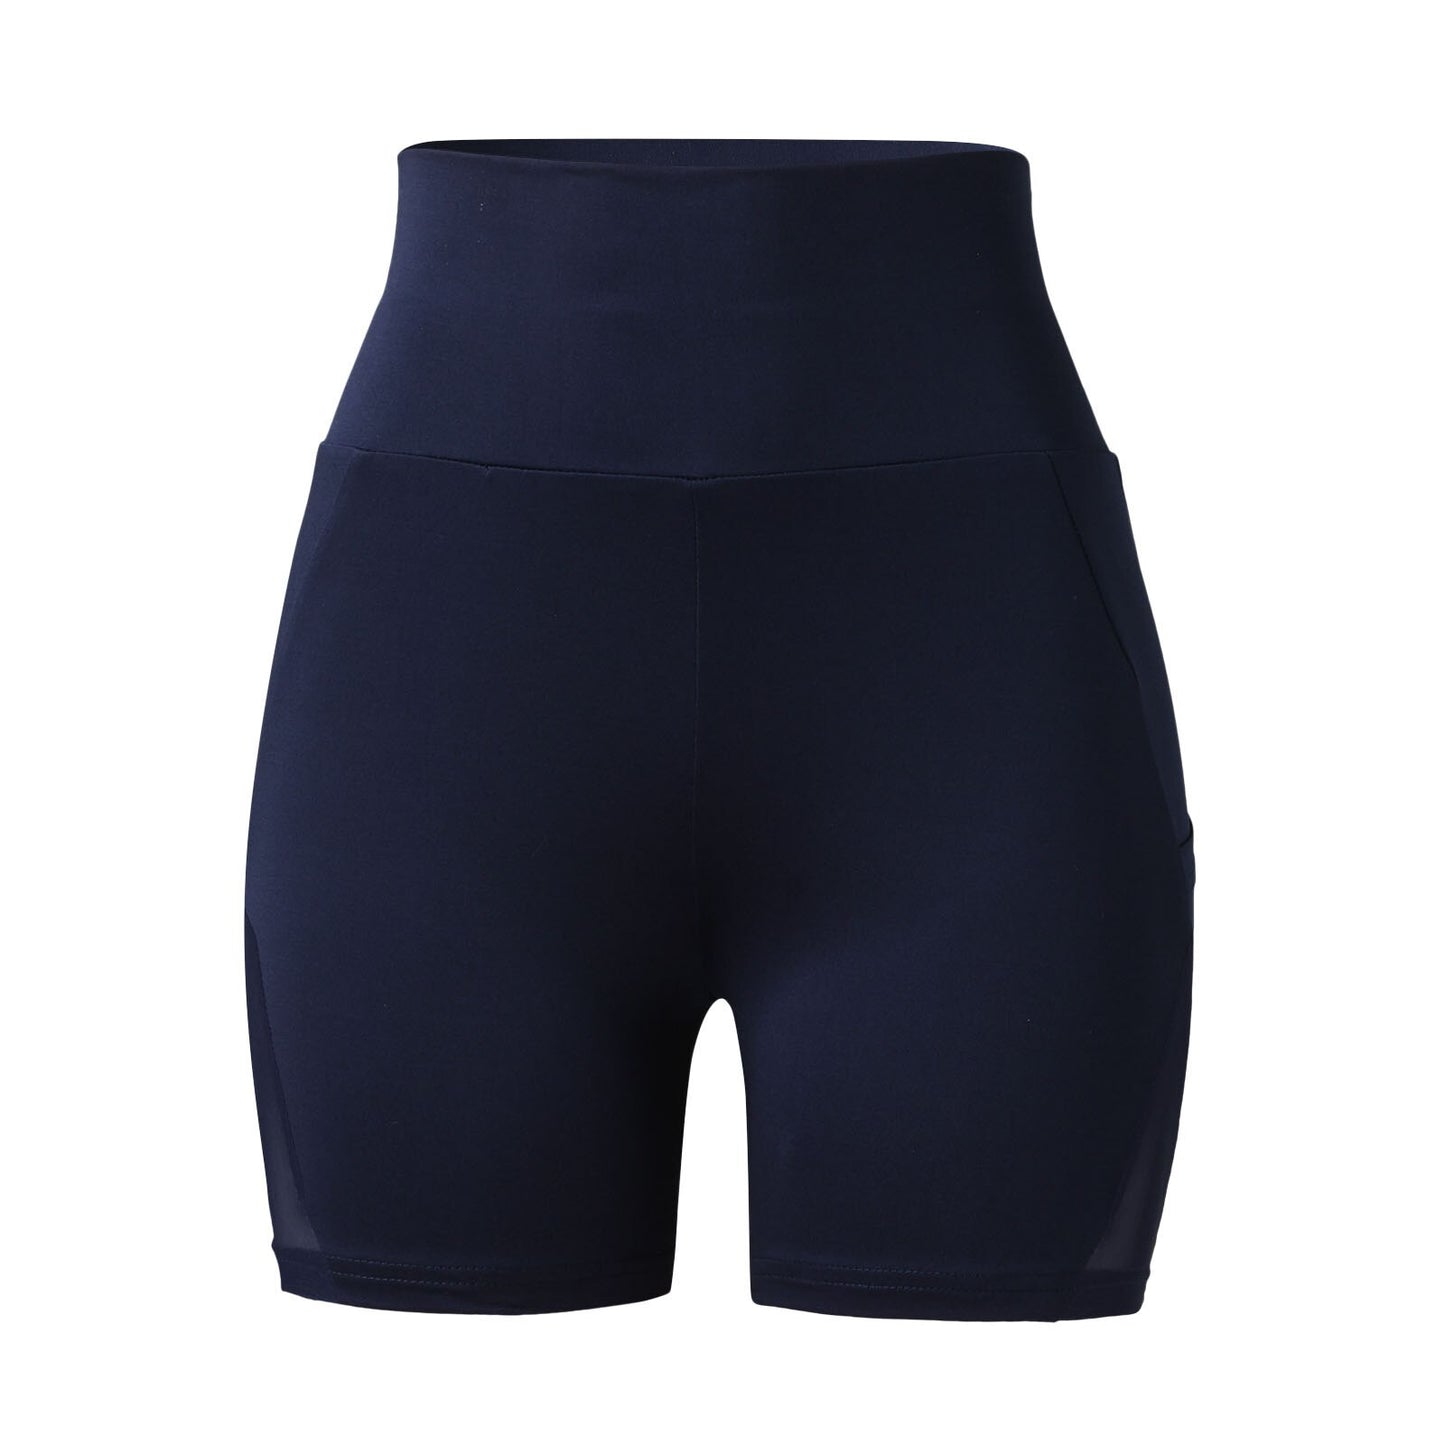 WILKYsShorts LeggingsWomen's Yoga Quick Dry Shorts 
Feel the power of the best Quick Dry Women's Yoga Shorts that provide superior softness and elasticity for those seamless workout routines. Crafted using 4-way str